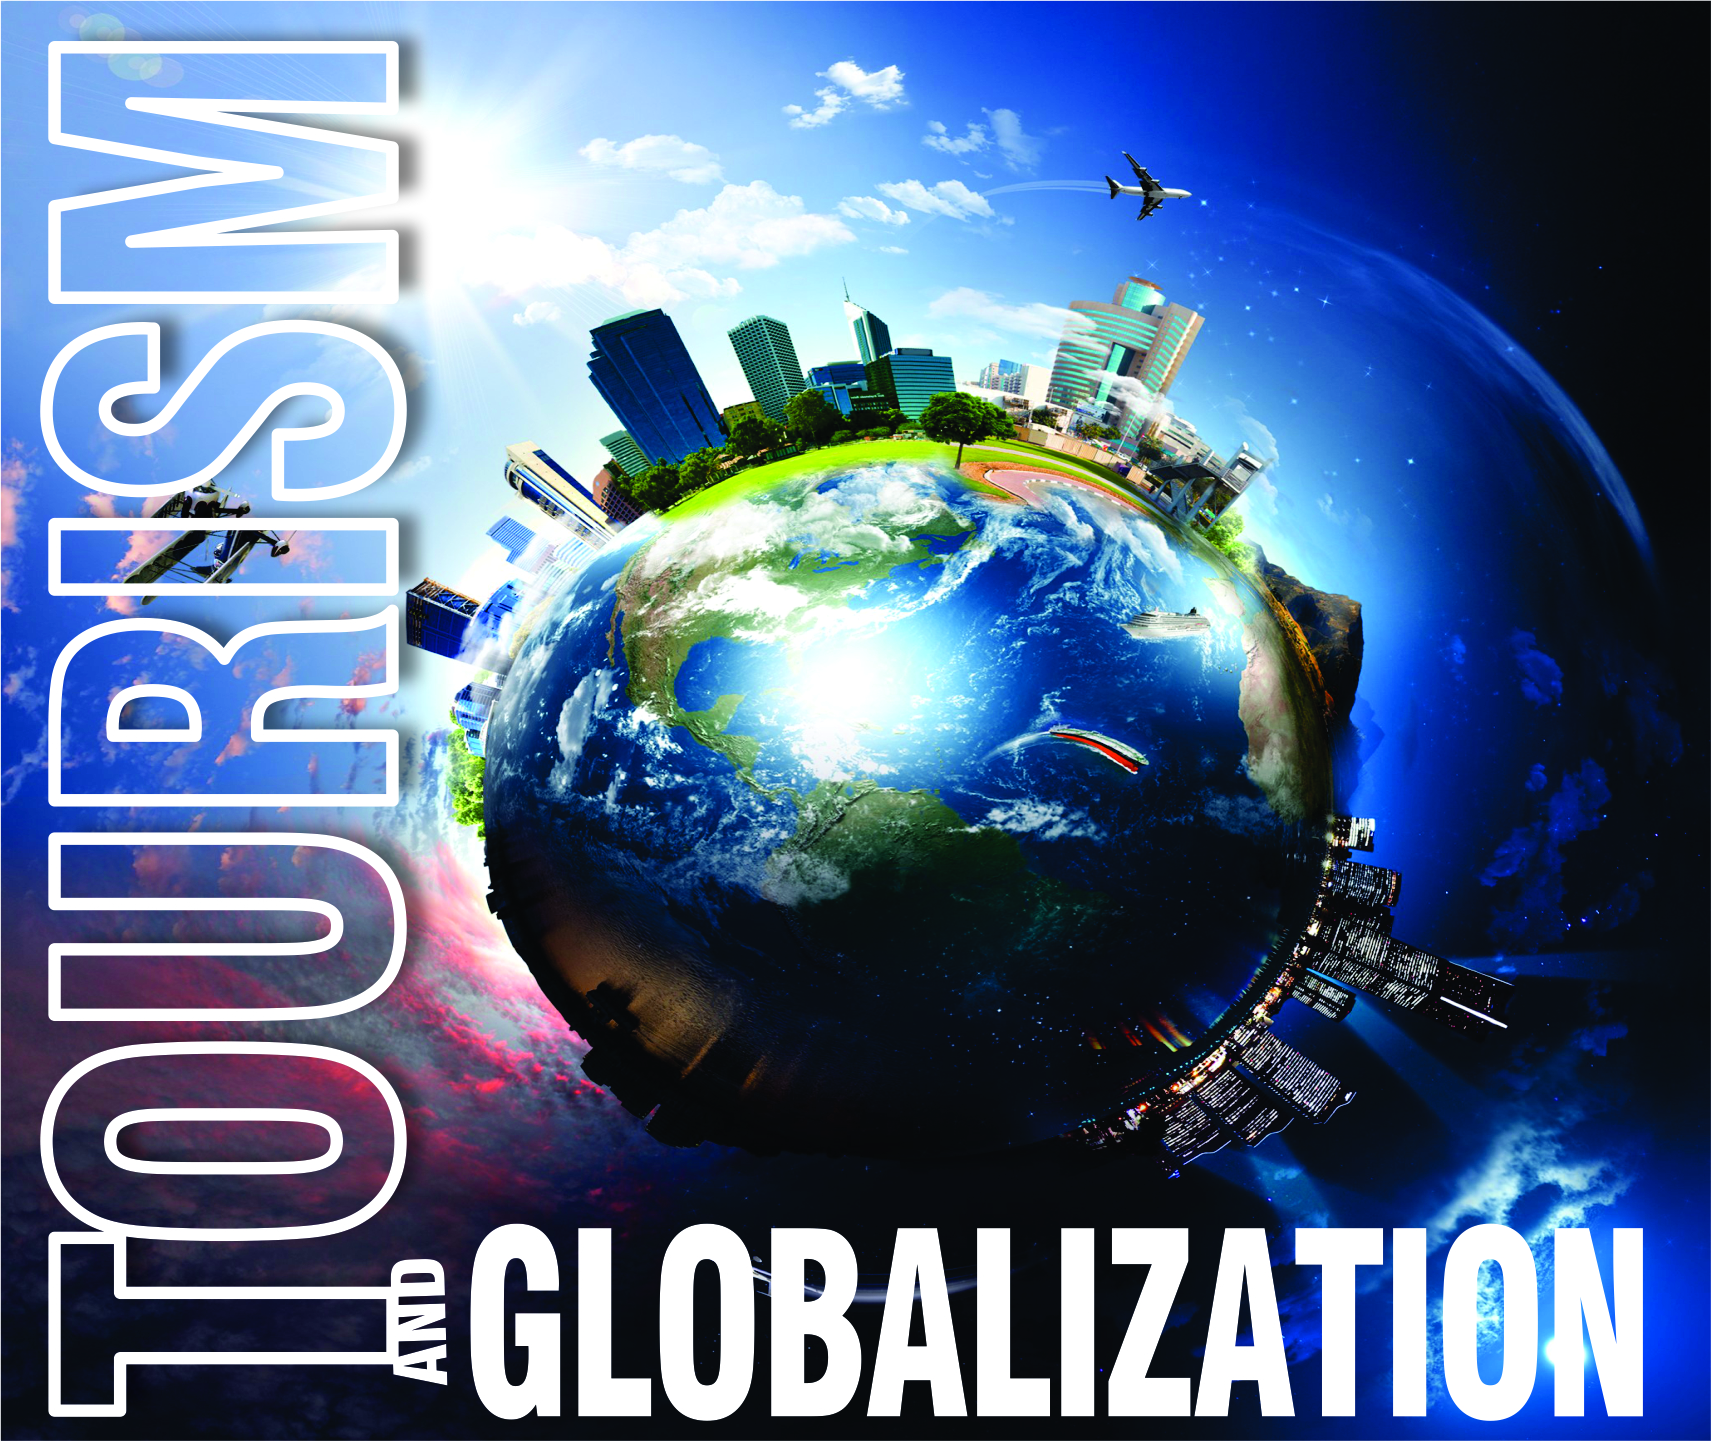 You are currently viewing Tourism and Globalization